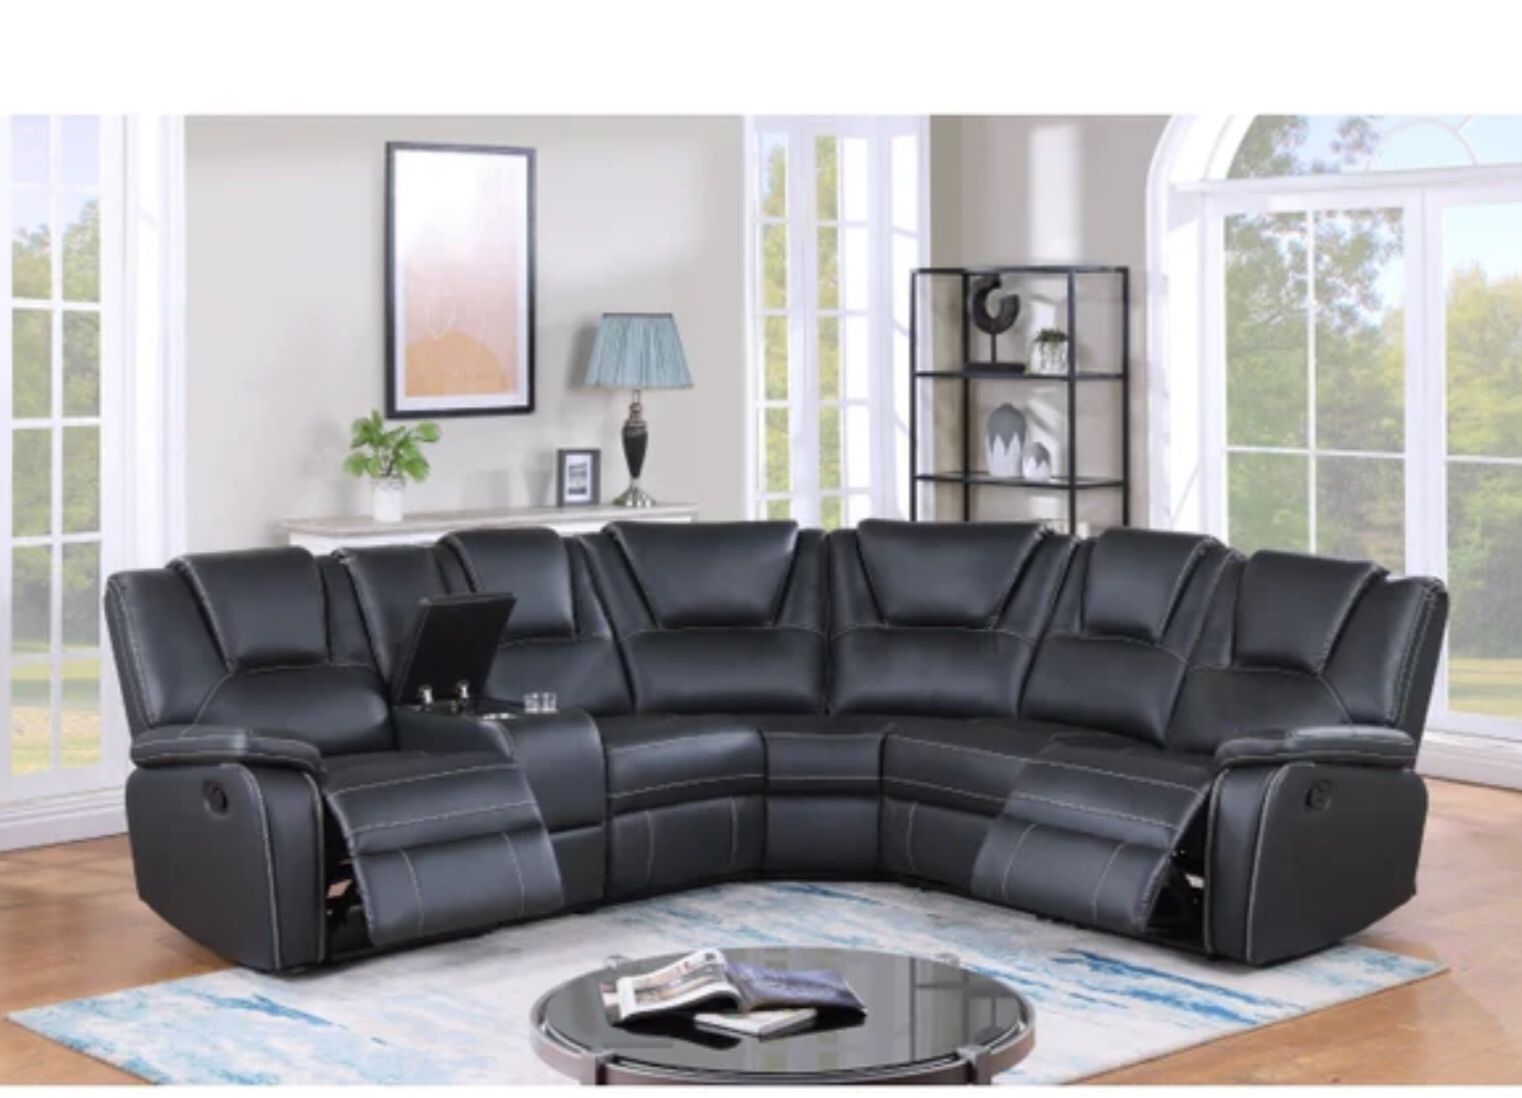 Reclining Sectional With Storage & Cup Console On Sale $1,299.99 👍 